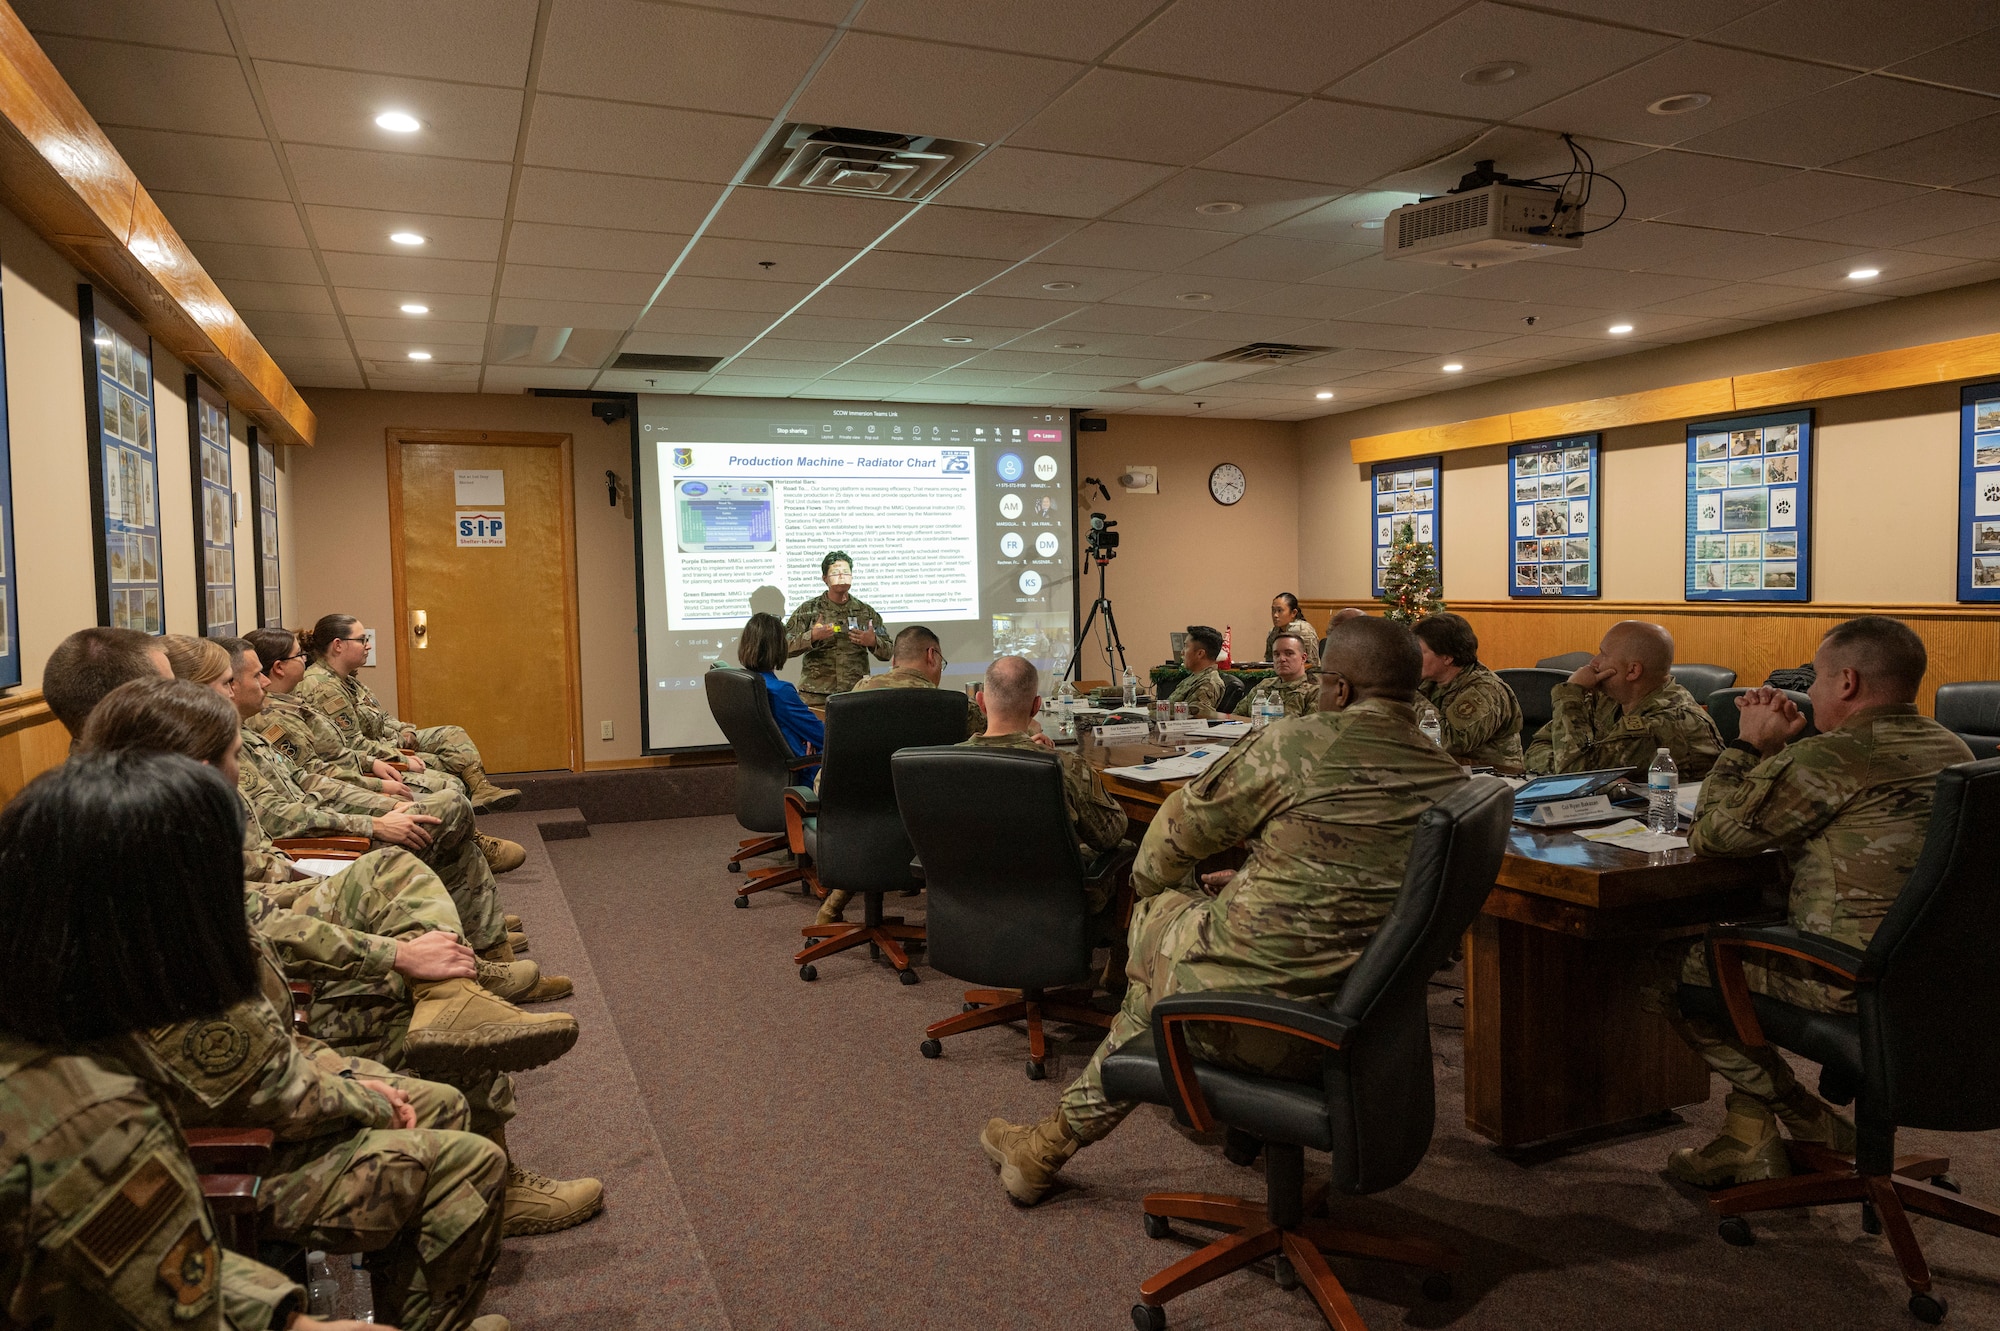 U.S. Air Force Lt. Col. Rebecca Corbin, 635th Materiel Maintenance Group deputy commander, gives a briefing to the U.S. Air Force Lt. Gen. Stacey Hawkins, Air Force Sustainment Center commander and his team at Holloman Air Force Base, New Mexico, Dec. 6, 2022. The 635th MMG’s primary goal is to provide equipment, training and fuel support to both the Department of Defense and civilian partners on a global scale. (U.S. Air Force photo by Airman 1st Class Isaiah Pedrazzini)